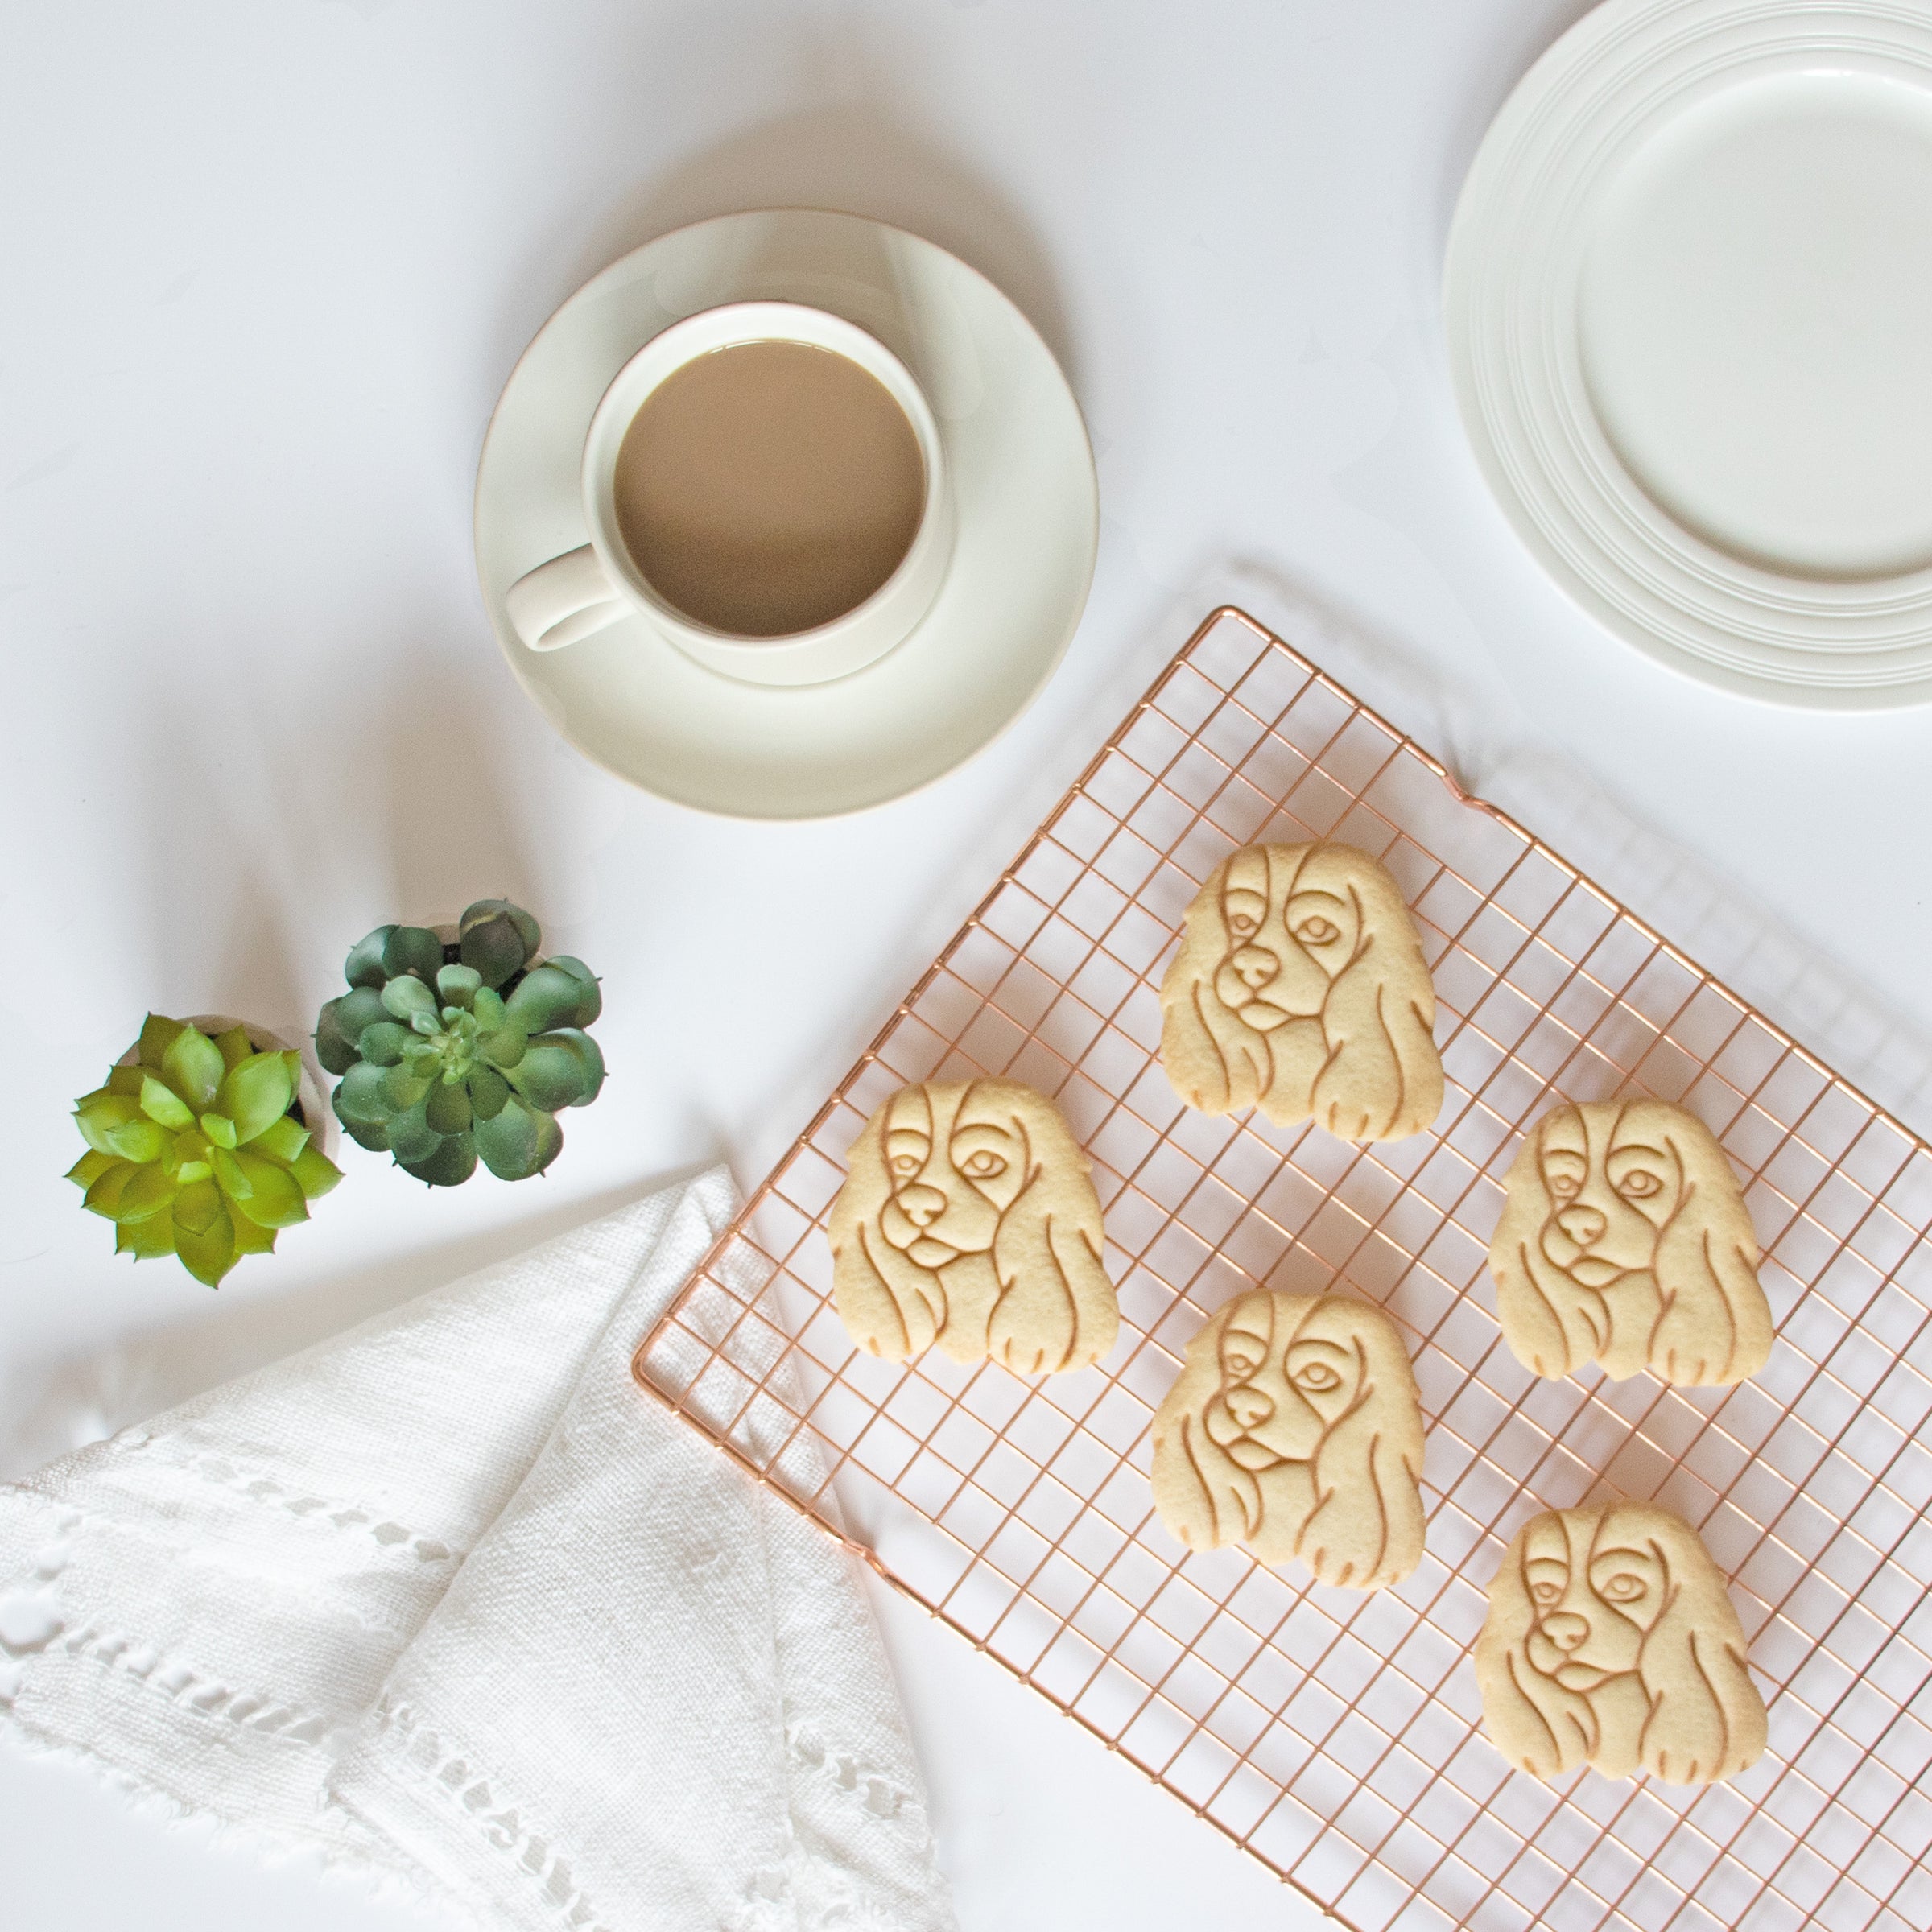 king charles portrait face cookies